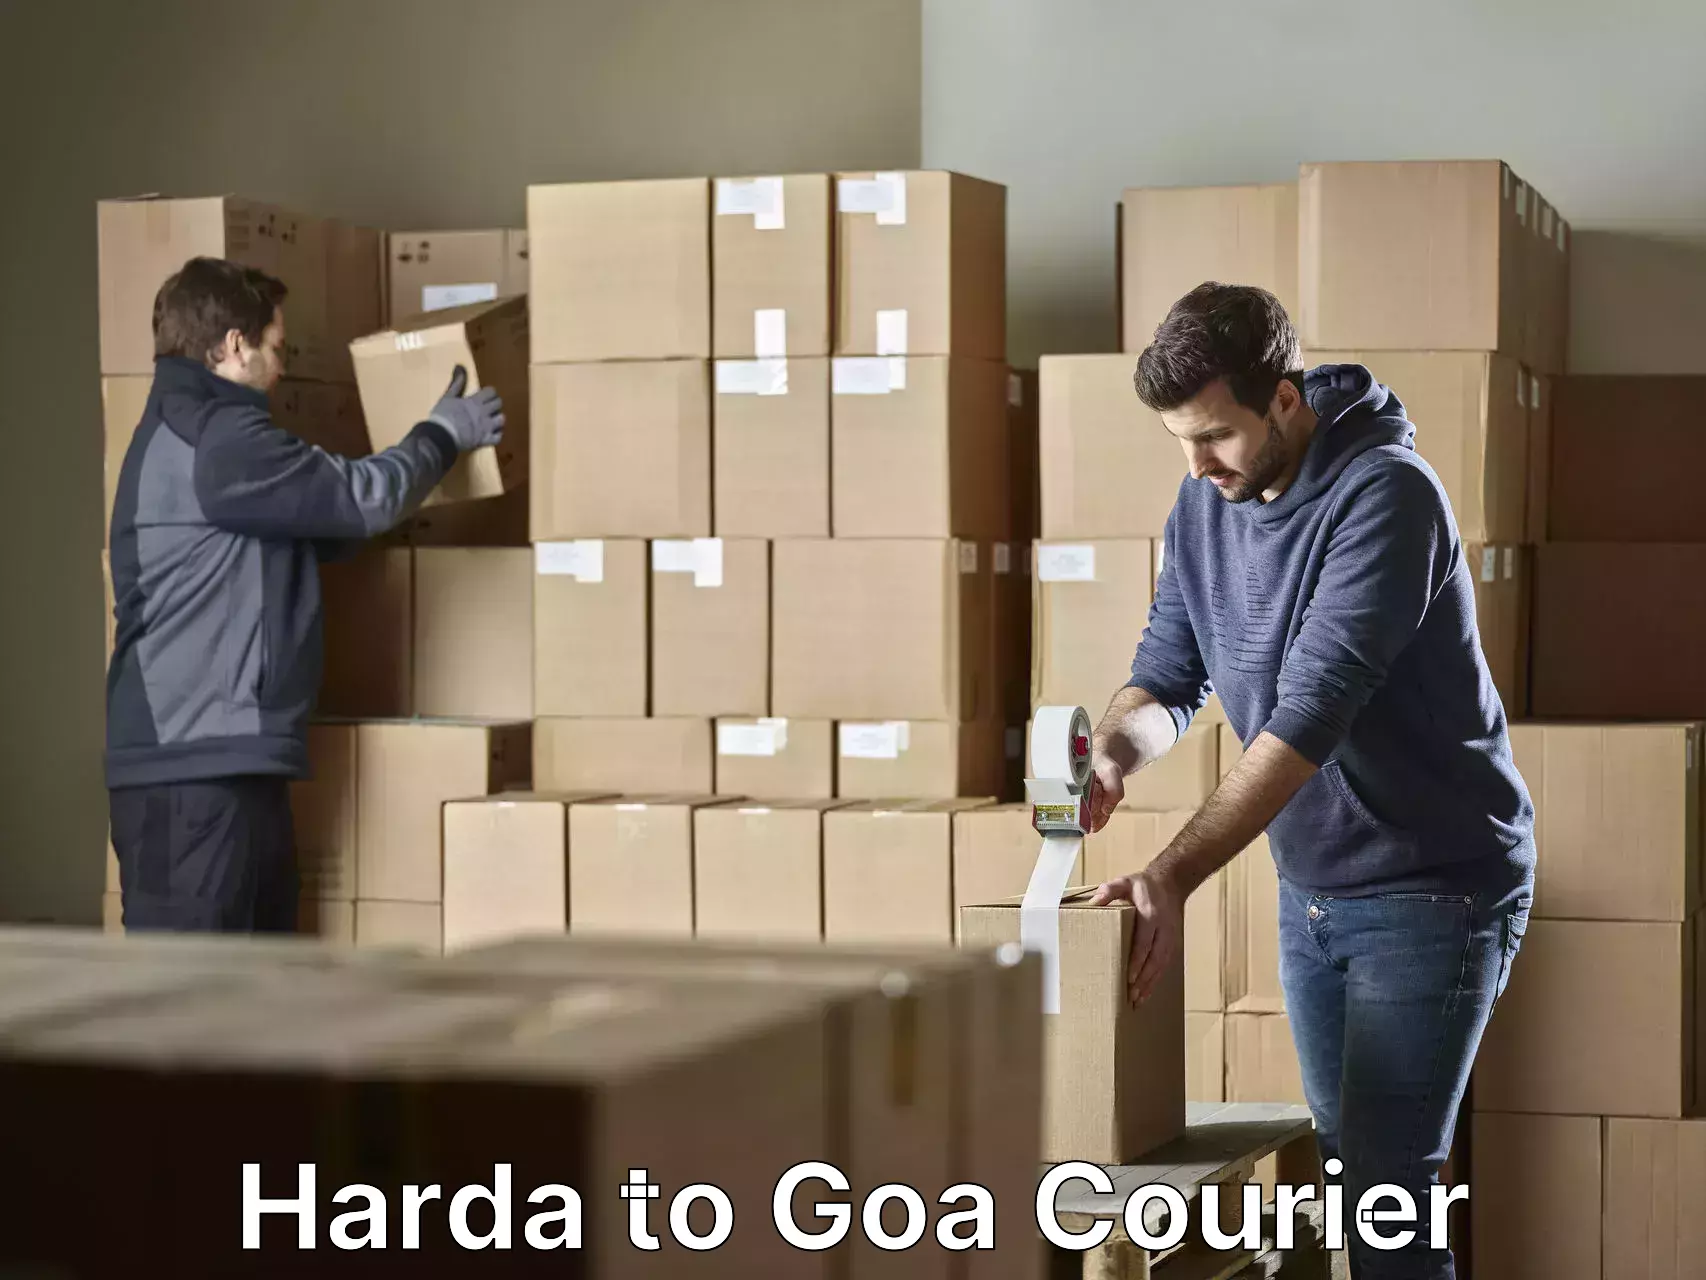 Trusted relocation experts Harda to Goa